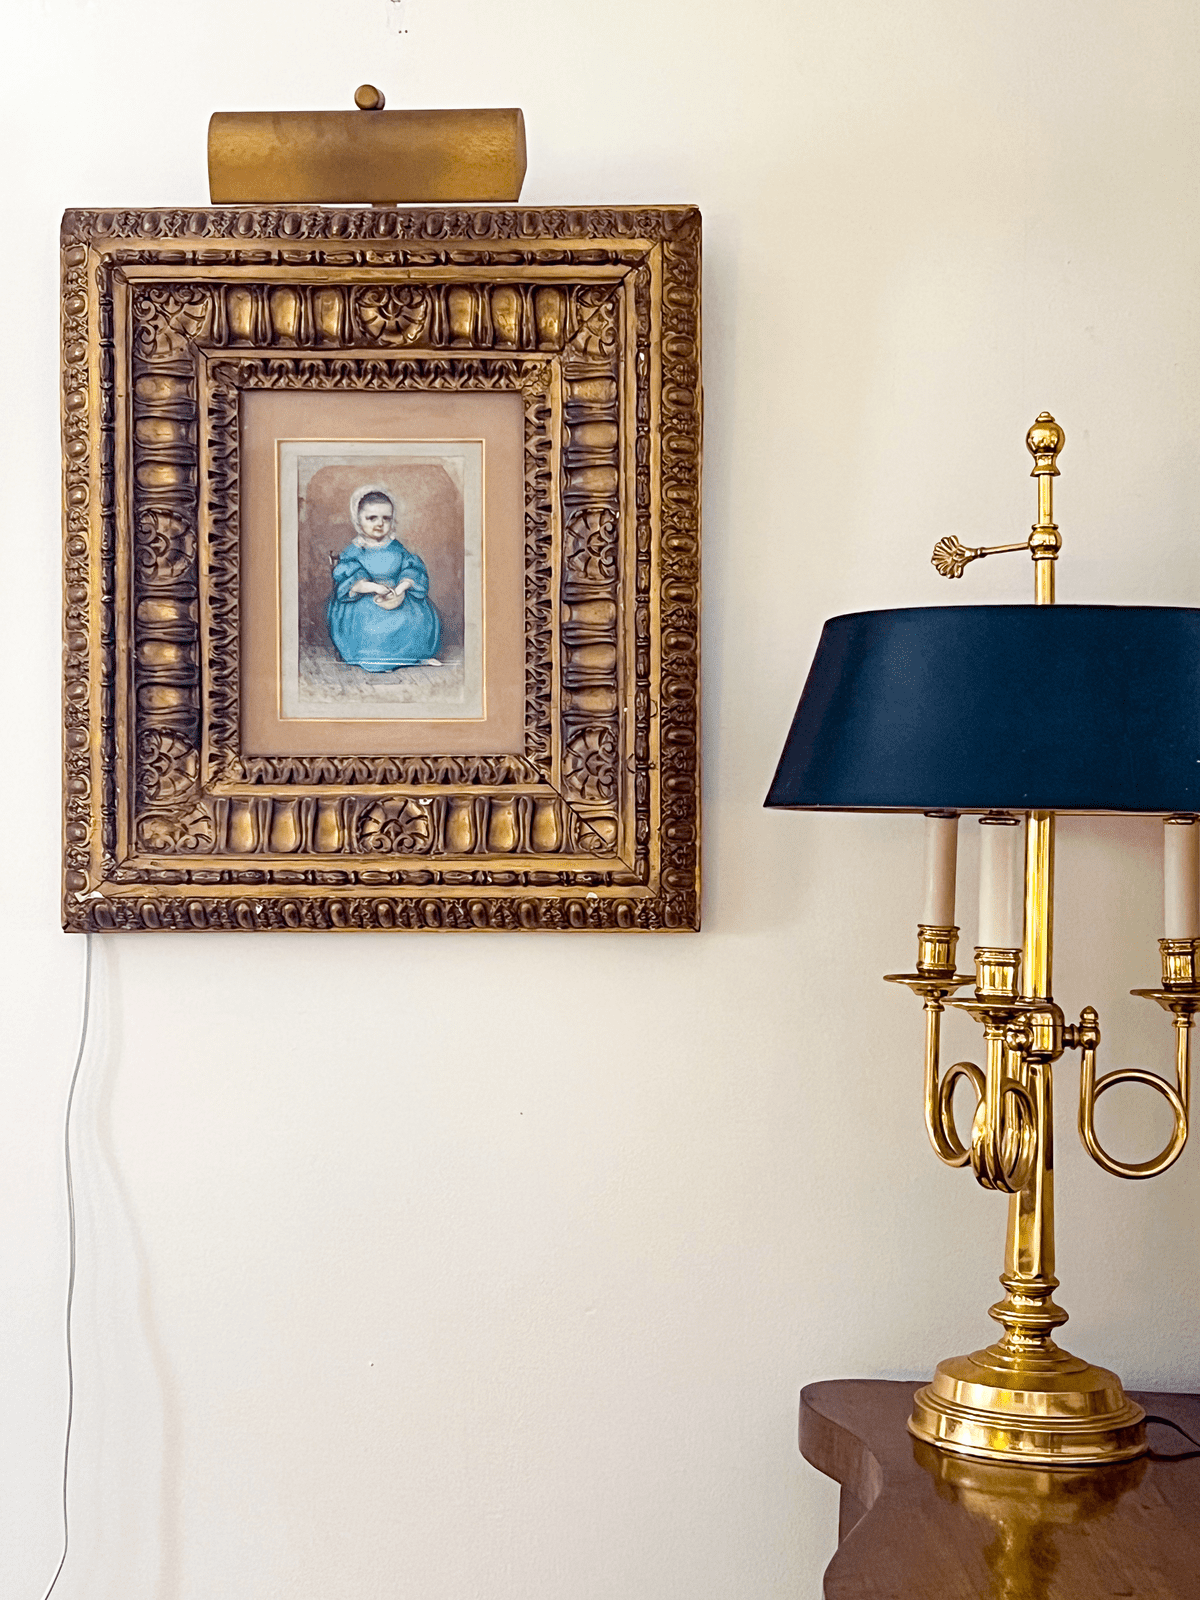 Ornate antique gold frame on wall with traditional brass lamp with black lampshade.